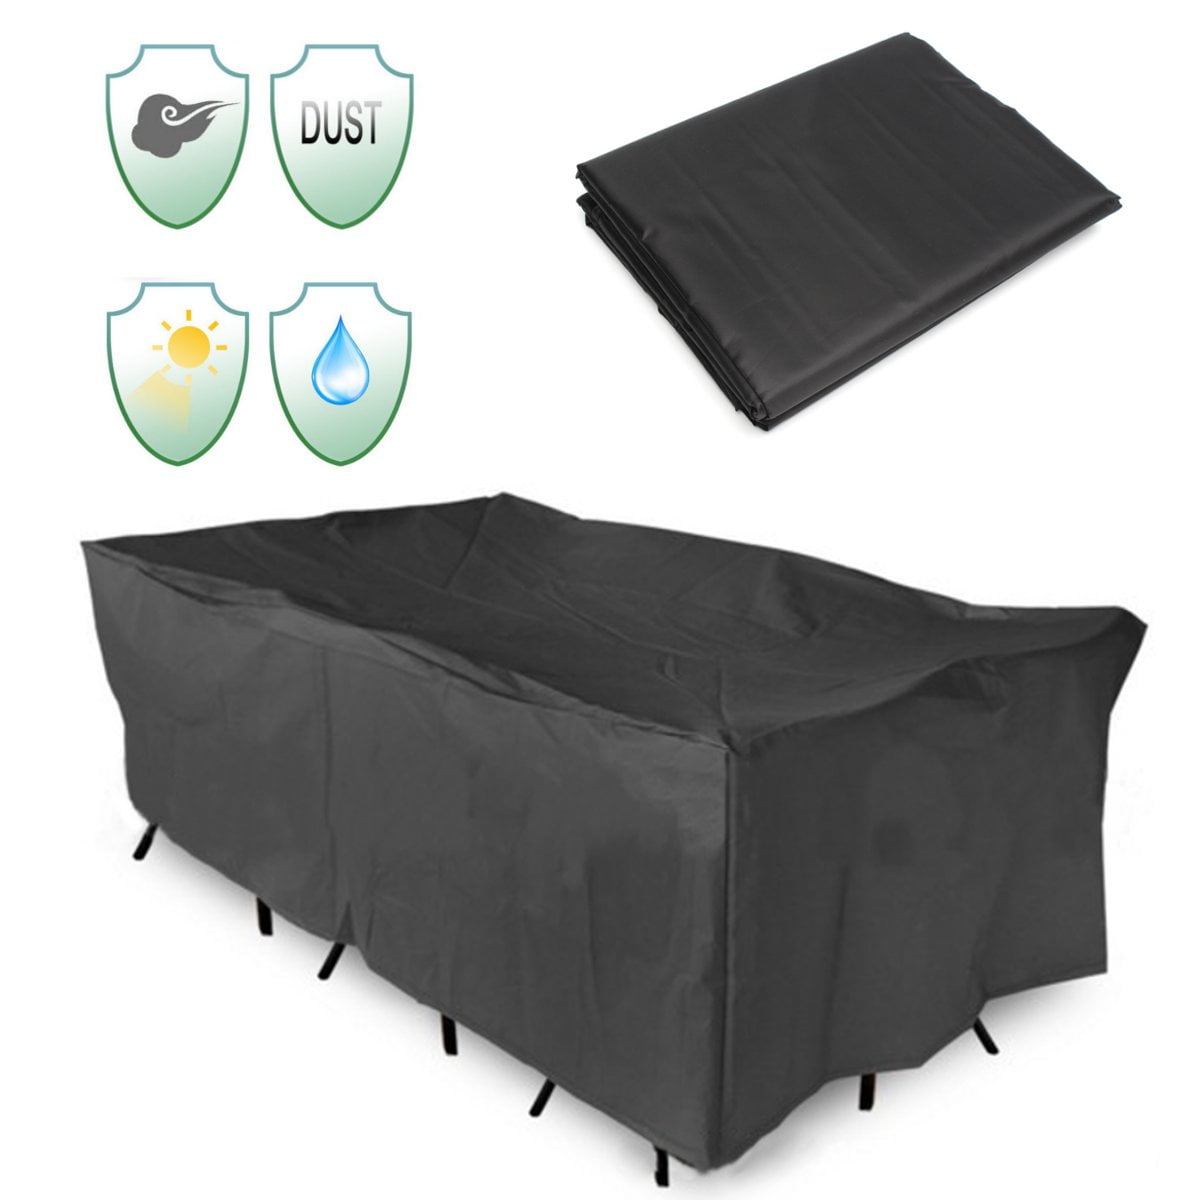 GARDEN FURNITURE SET COVER WATERPROOF COVERS RATTAN TABLE cuboid OUTDOOR 